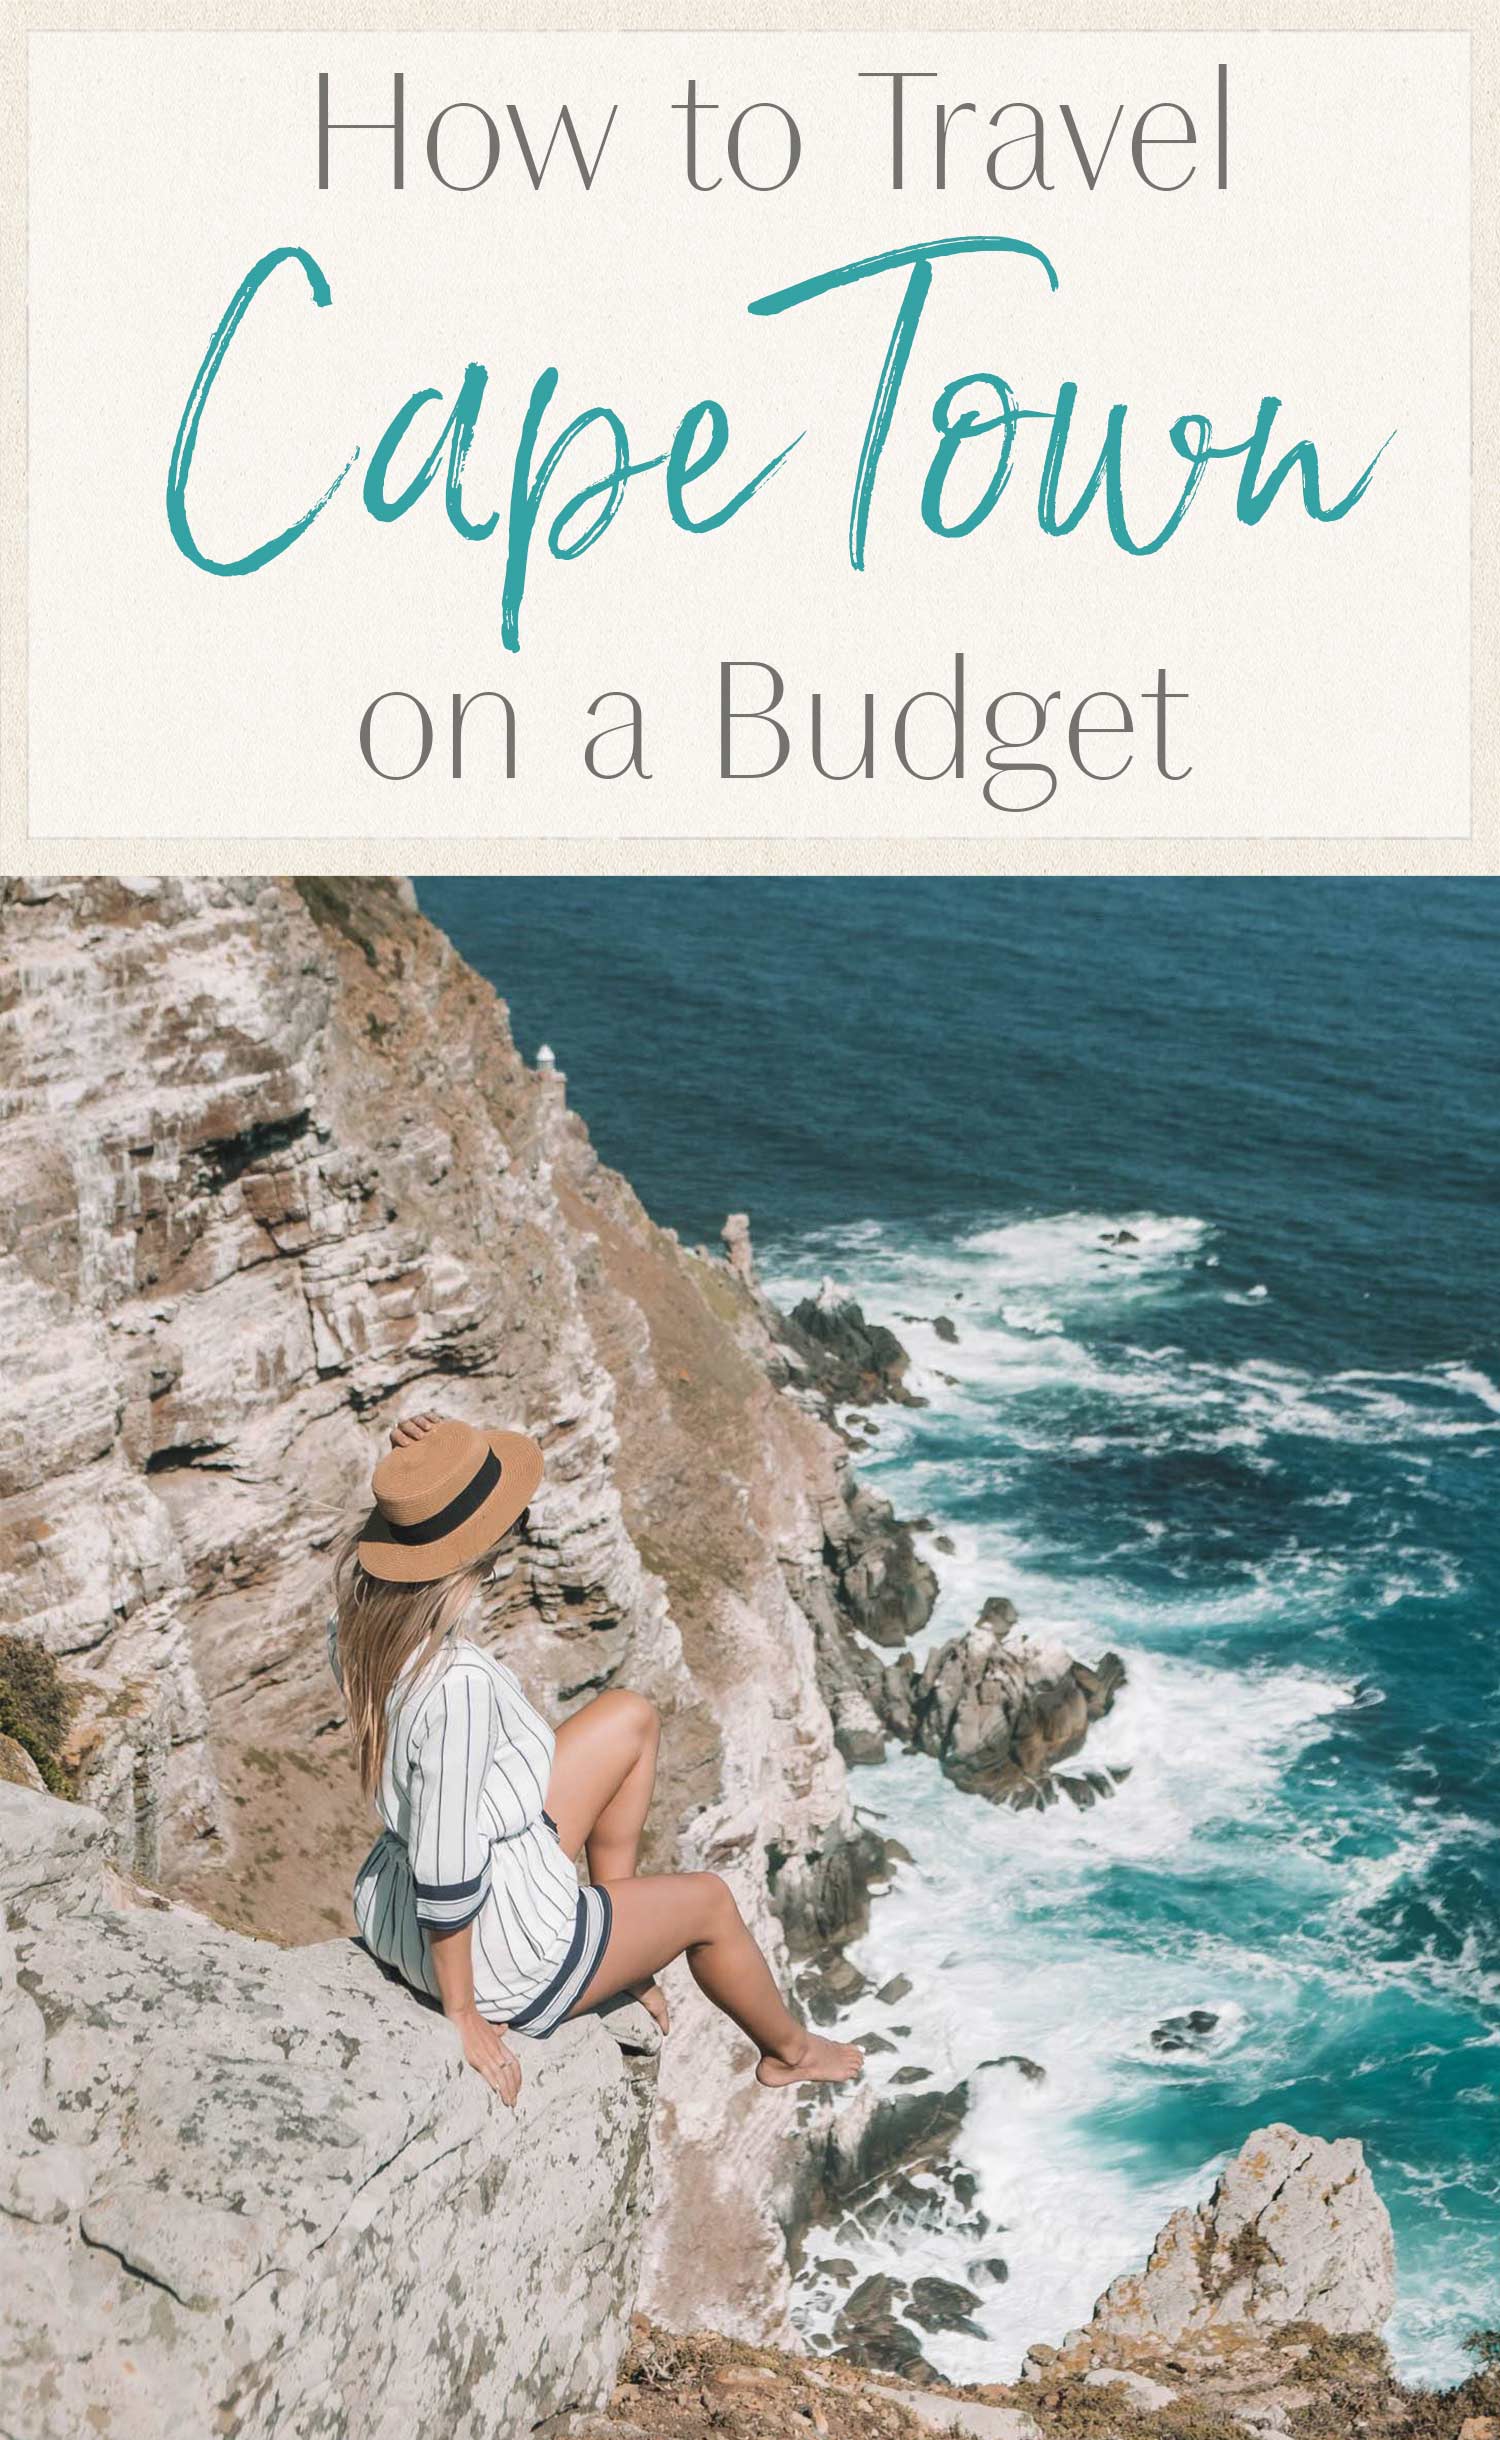 how to travel cape town on a budget